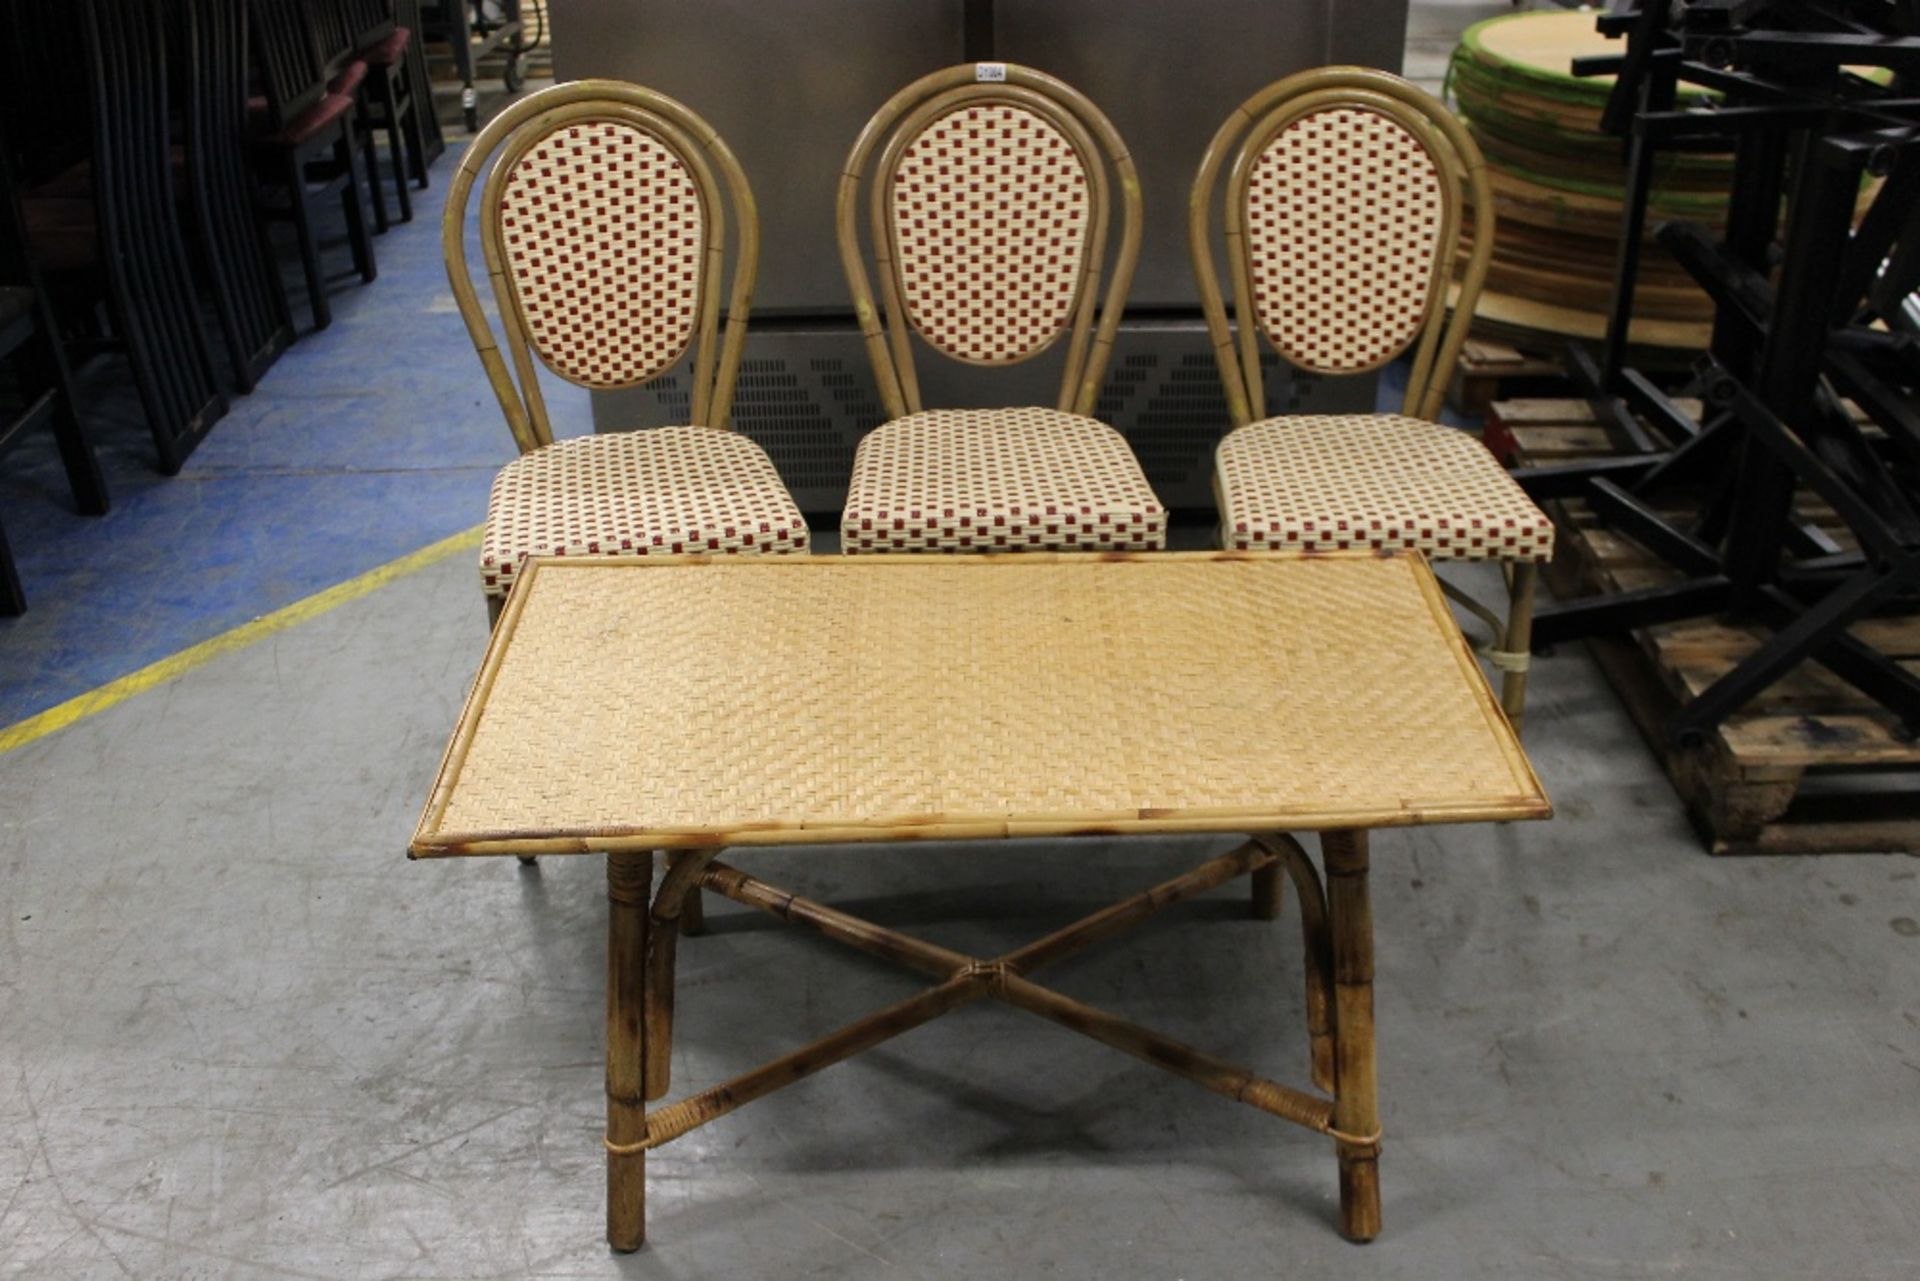 3 x Matching Bamboo Chairs + Bamboo Coffee Table